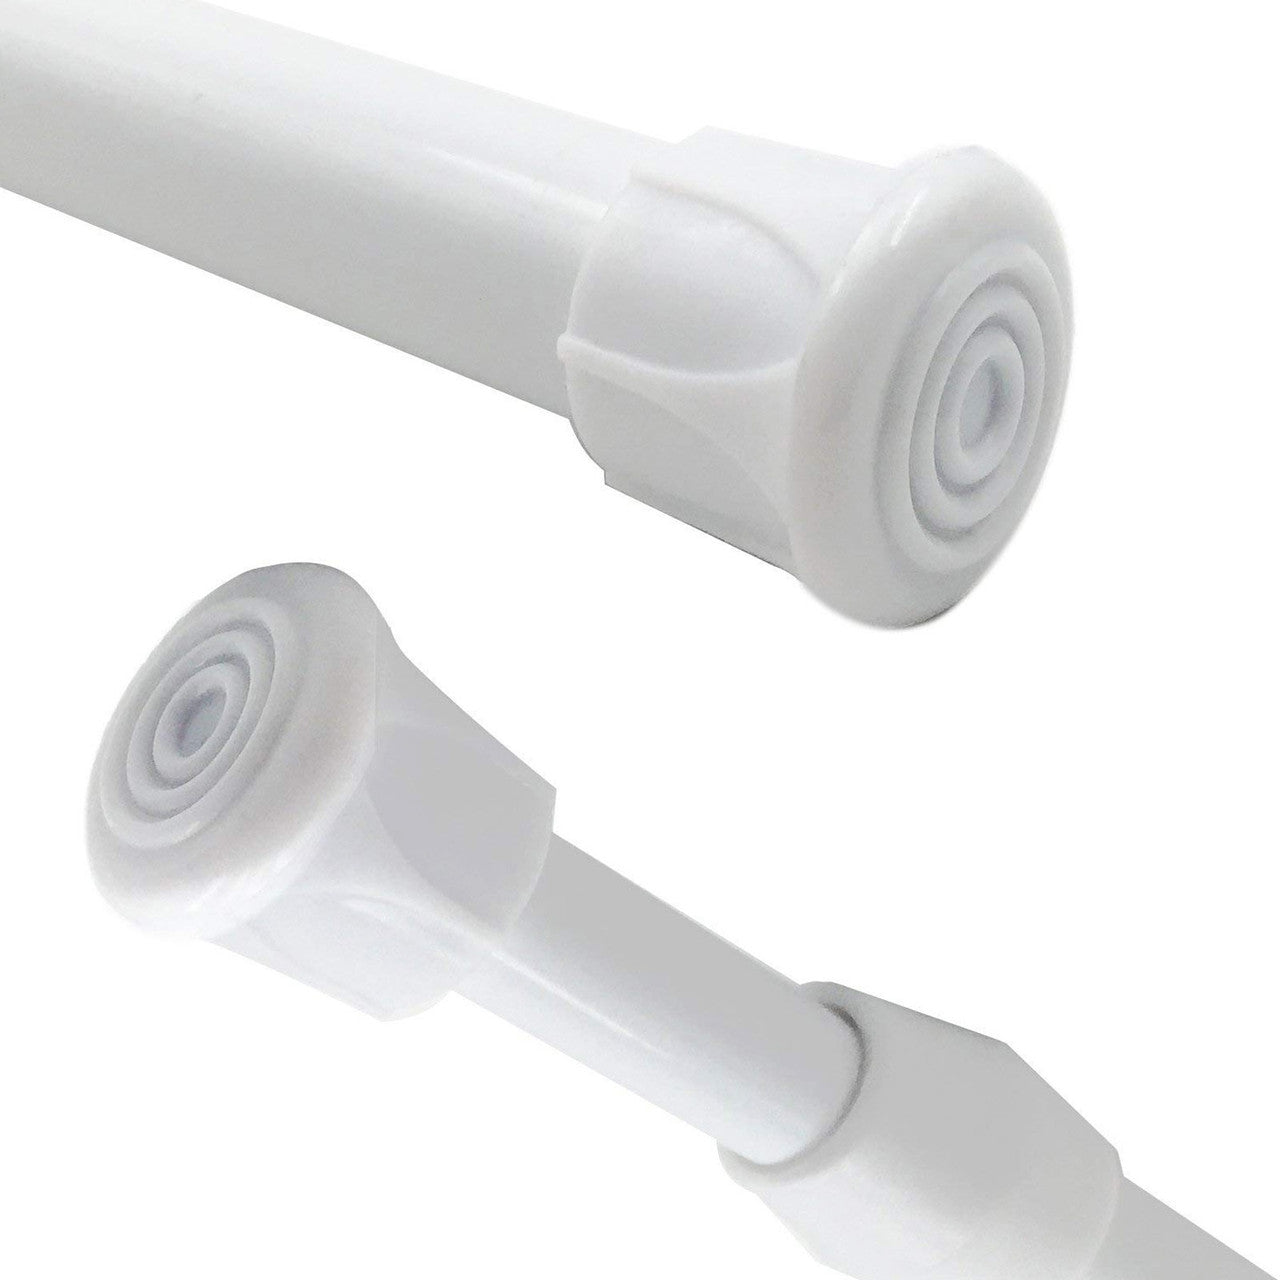 Adjustable Tension Rods 11.8" to 27.6", 1Pcs Spring Tension Rods, Extension Spring Rods Closet Rod Cupboard Bars Tensions Rod for Windows,Kitchen, Bathroom,Cupboard,Wardrobe (White)